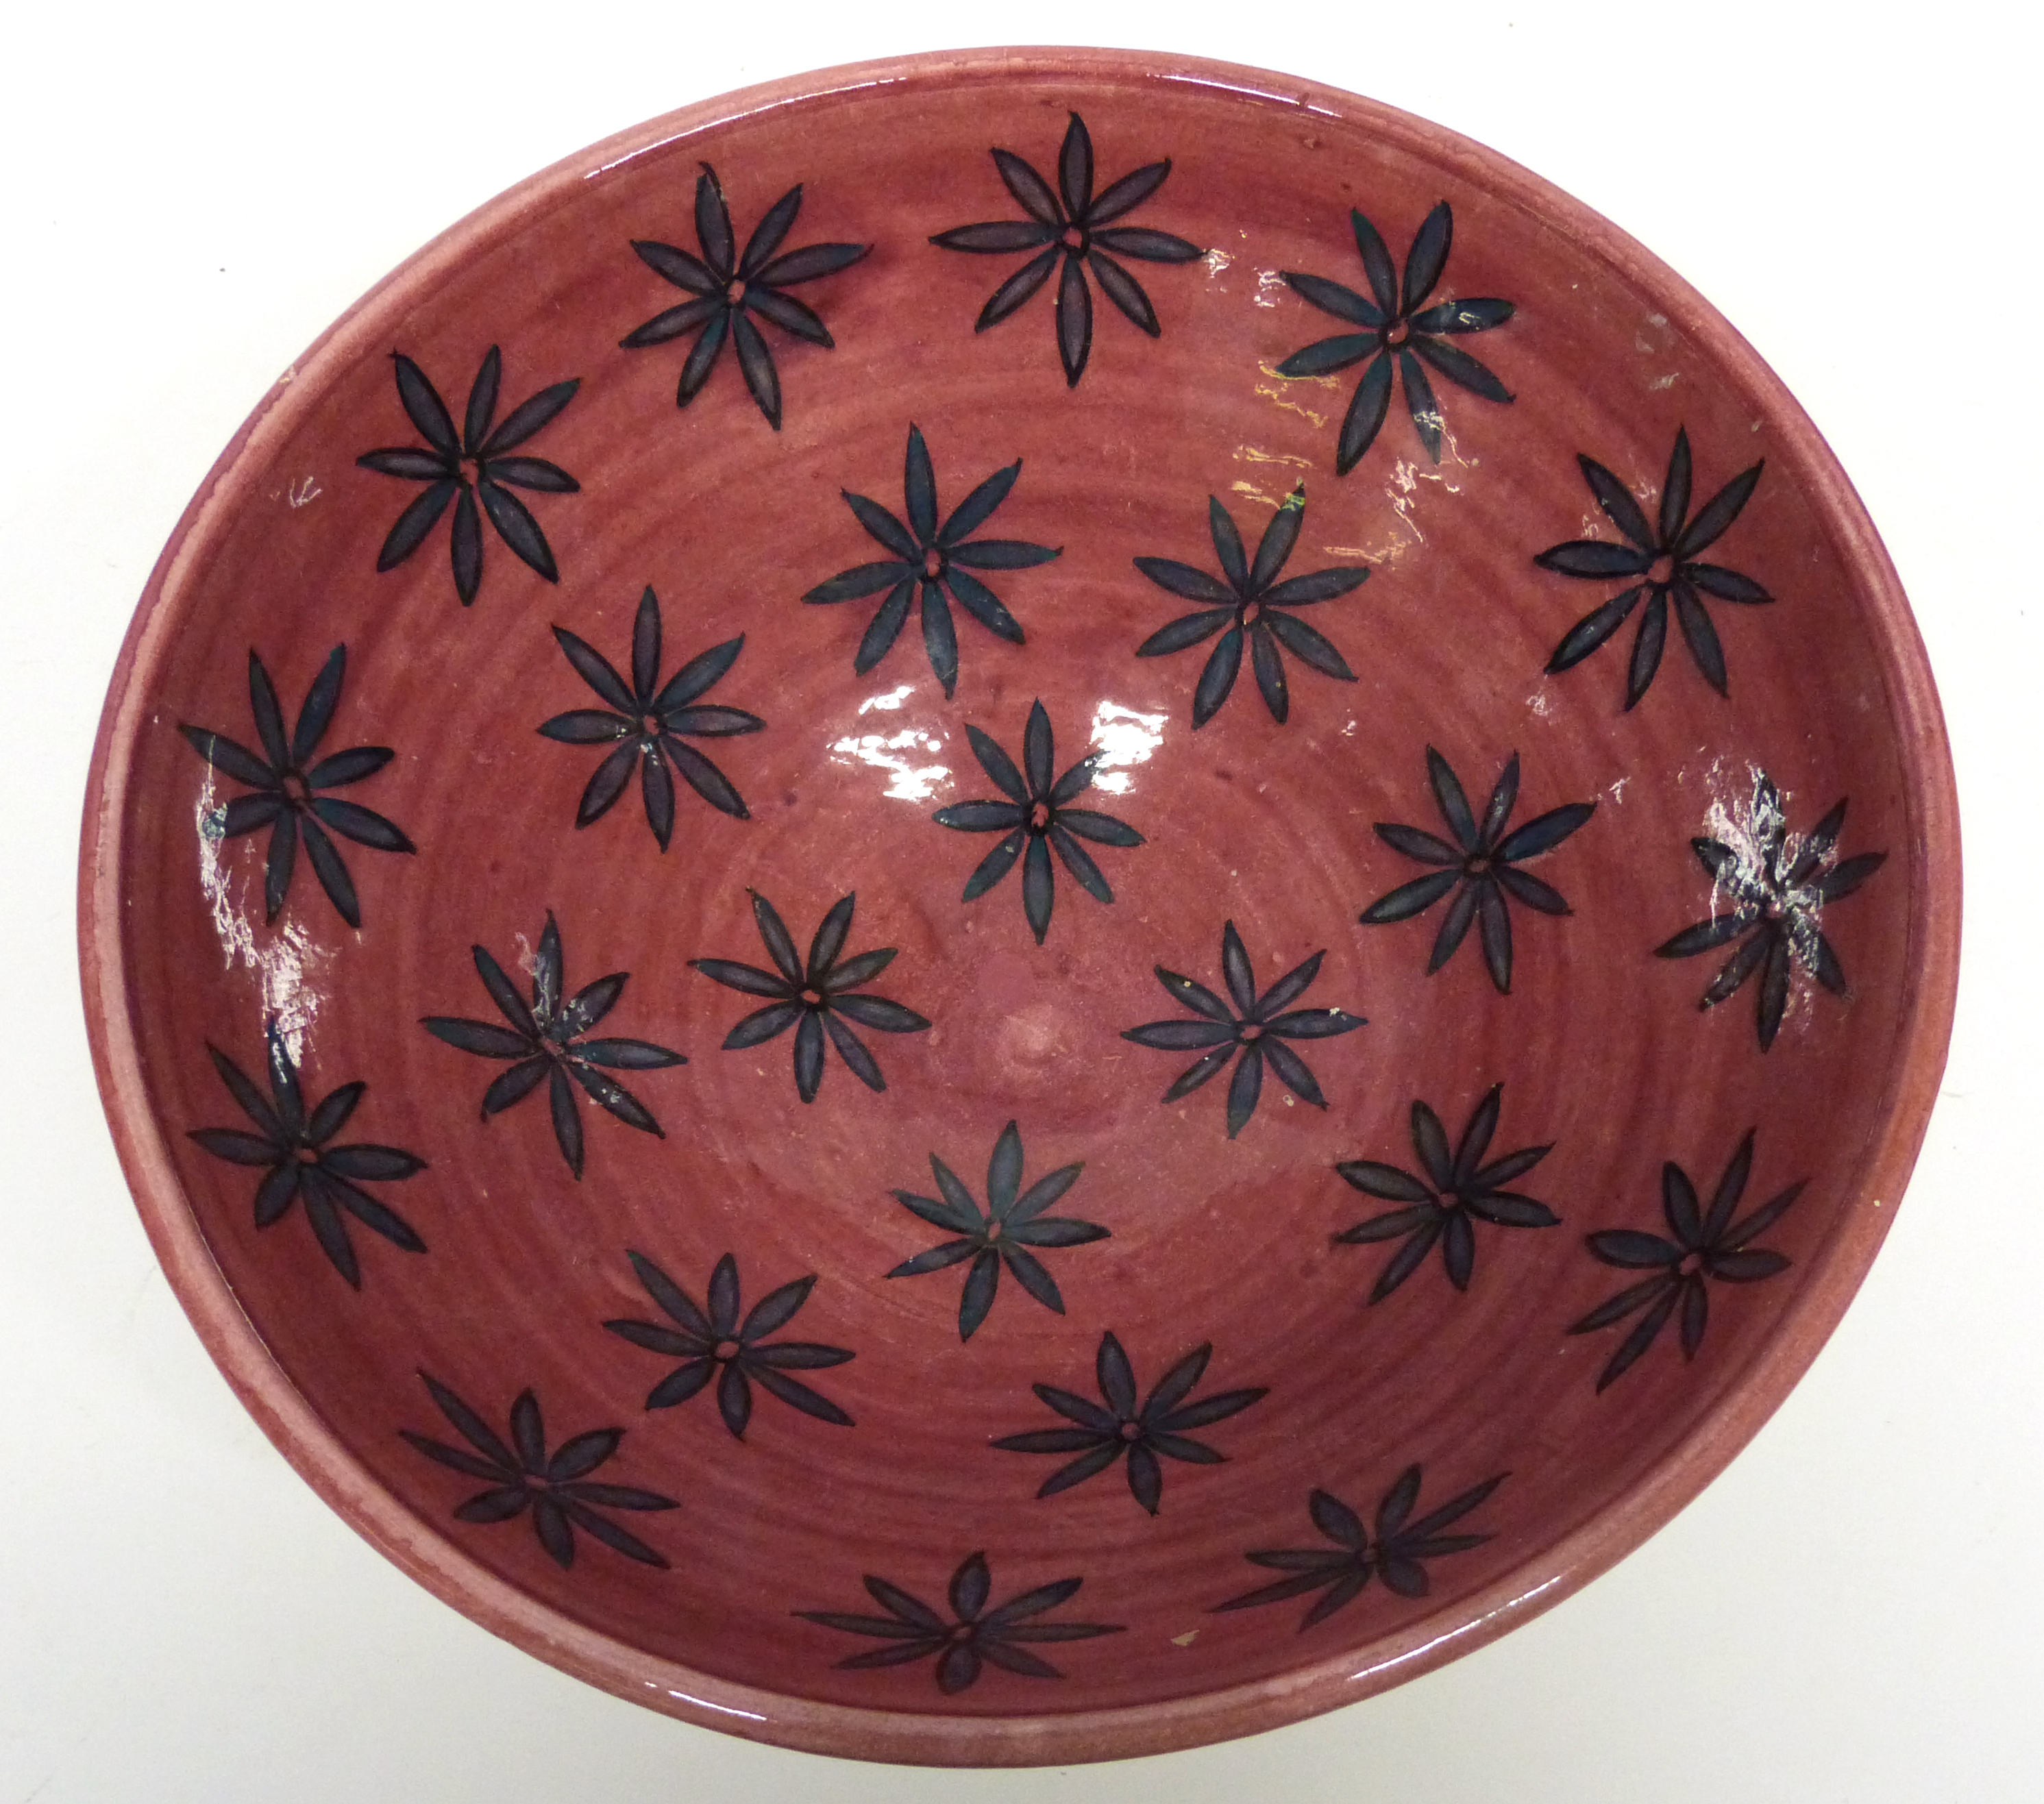 Safi Middle Eastern bowl, the interior with a red glazed star design, 26cm diam